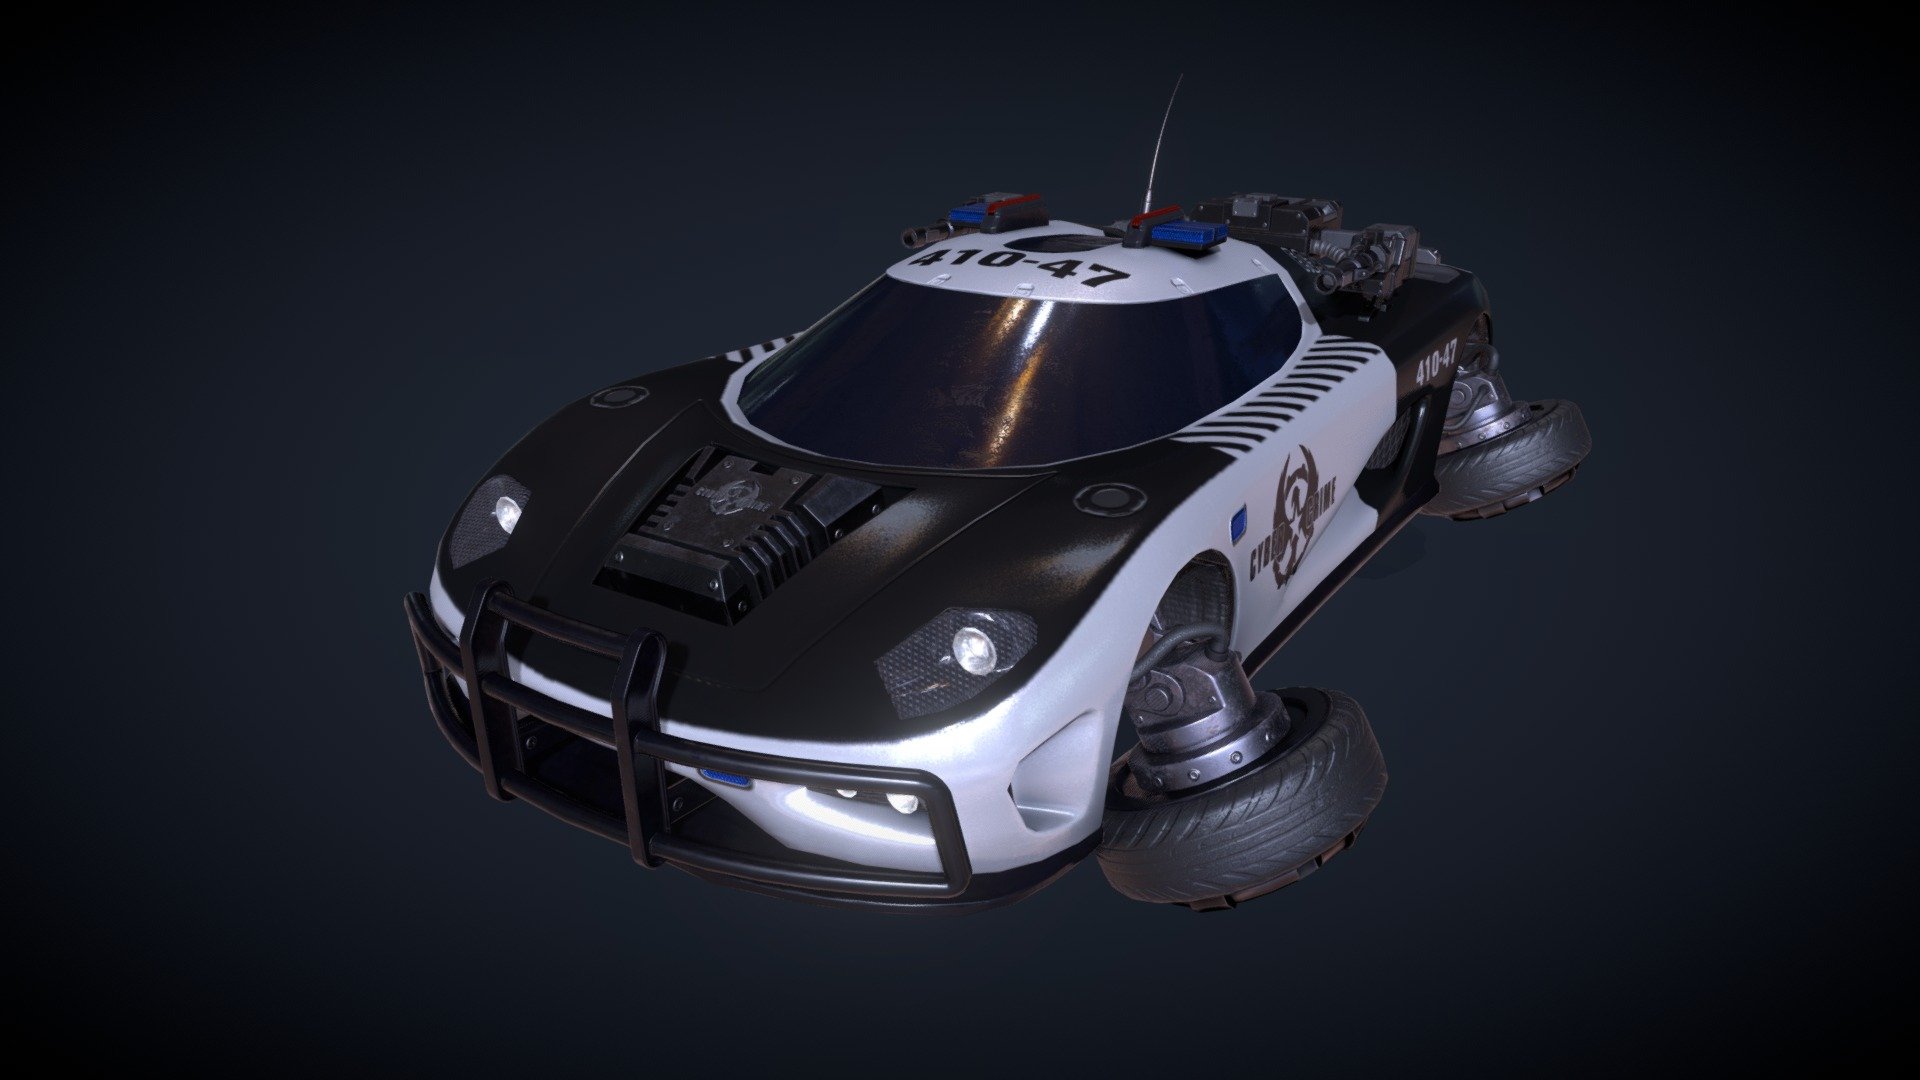 My first Sketchfab Upload. Working on my Substance Painter skills. Making a few vehicles for a futuristic animated loop. This model was modeled in C4D, UVed in RizomUv and textured in Substance painter. Used 3 UDIMs at 2k each 3d model